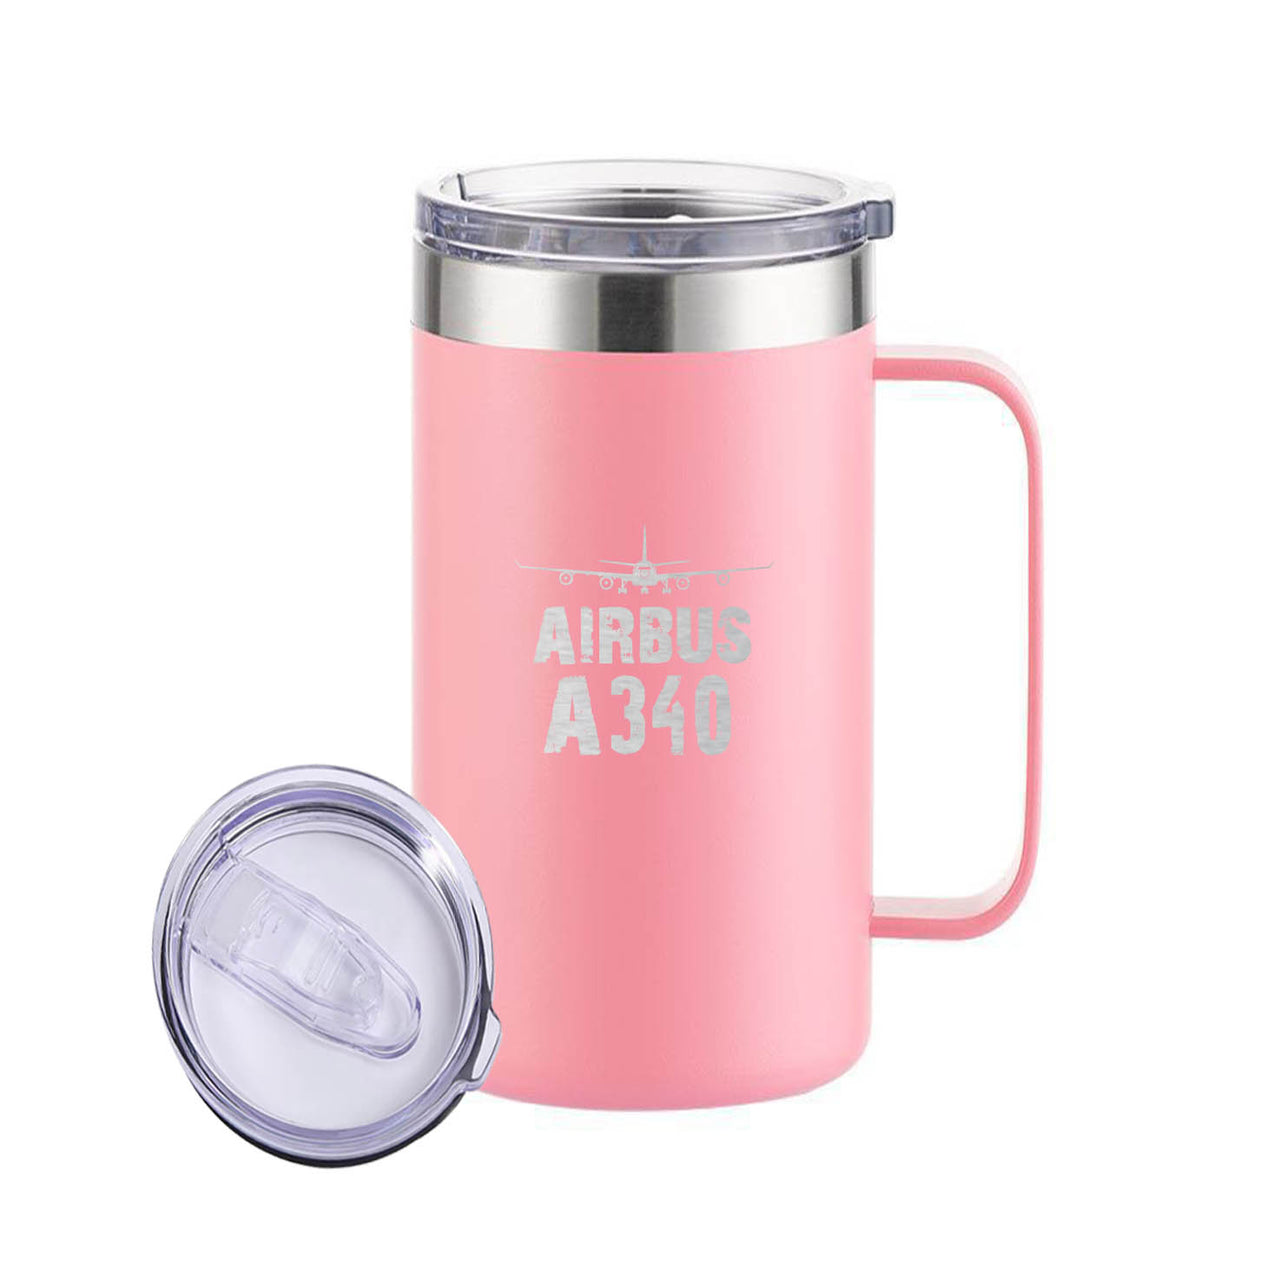 Airbus A340 & Plane Designed Stainless Steel Beer Mugs